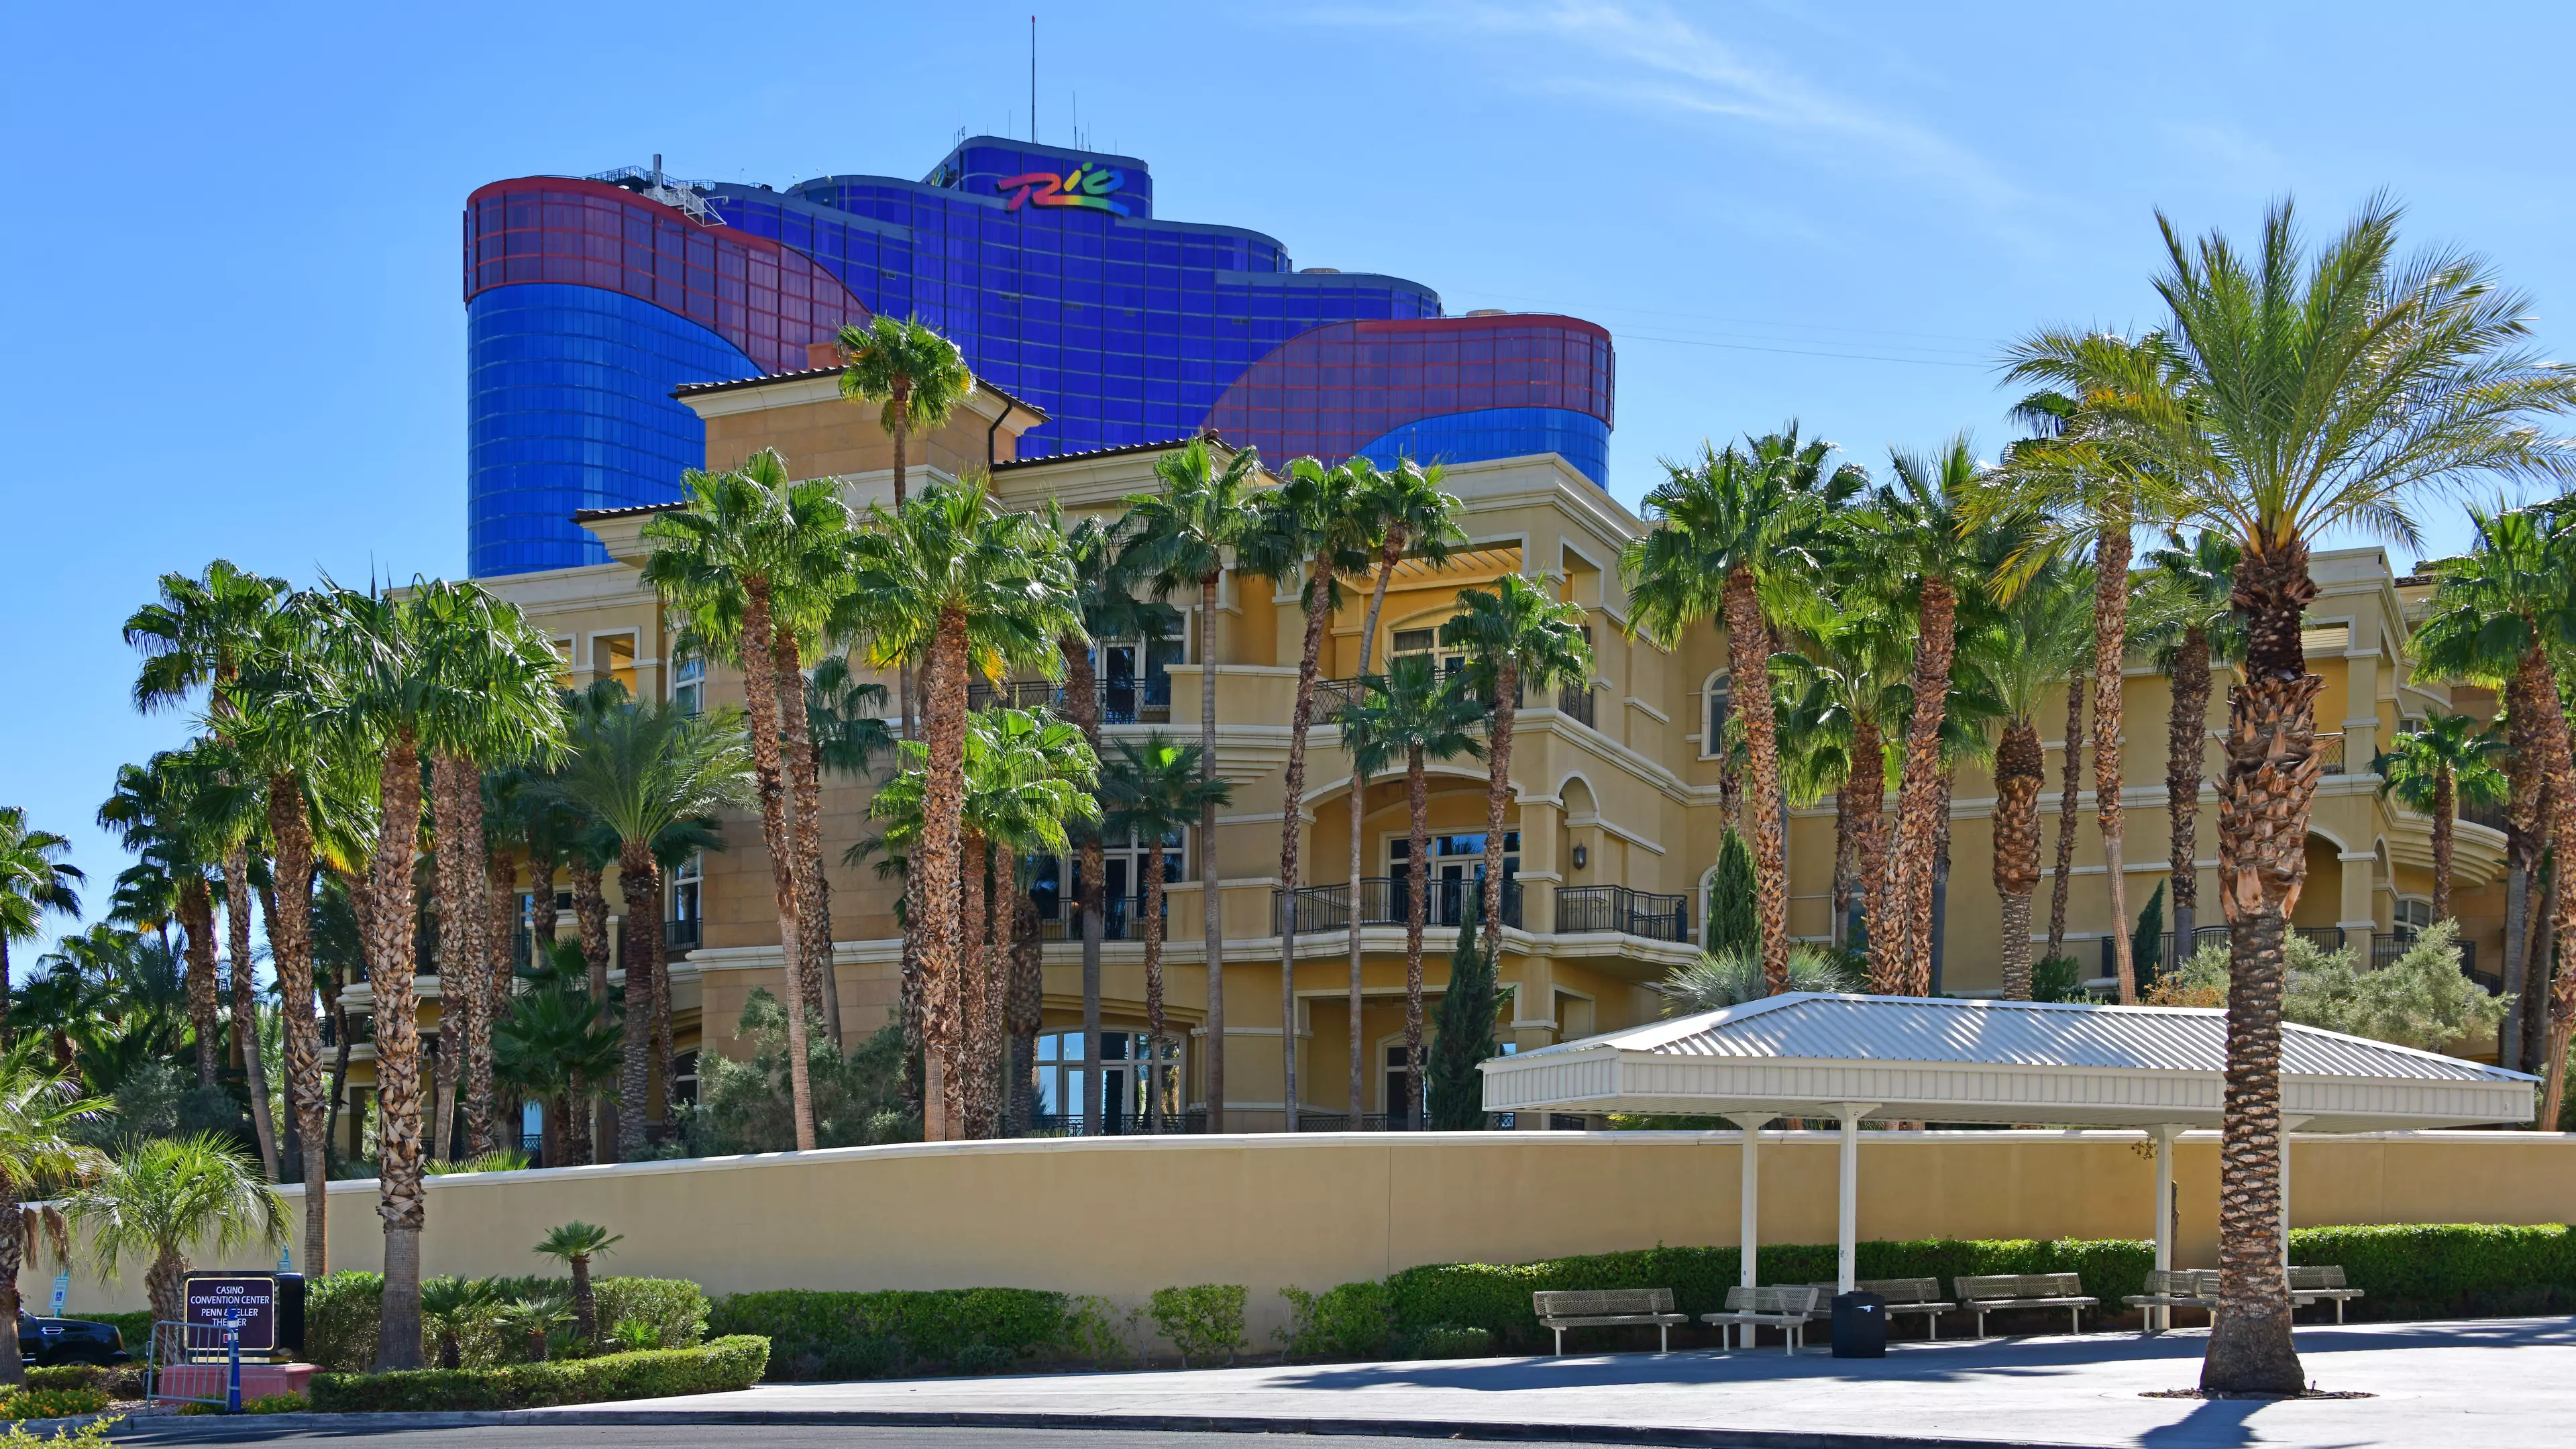 The World Series of Poker Main Event 2021 will be held at the Rio All-Suite Hotel and Casino.